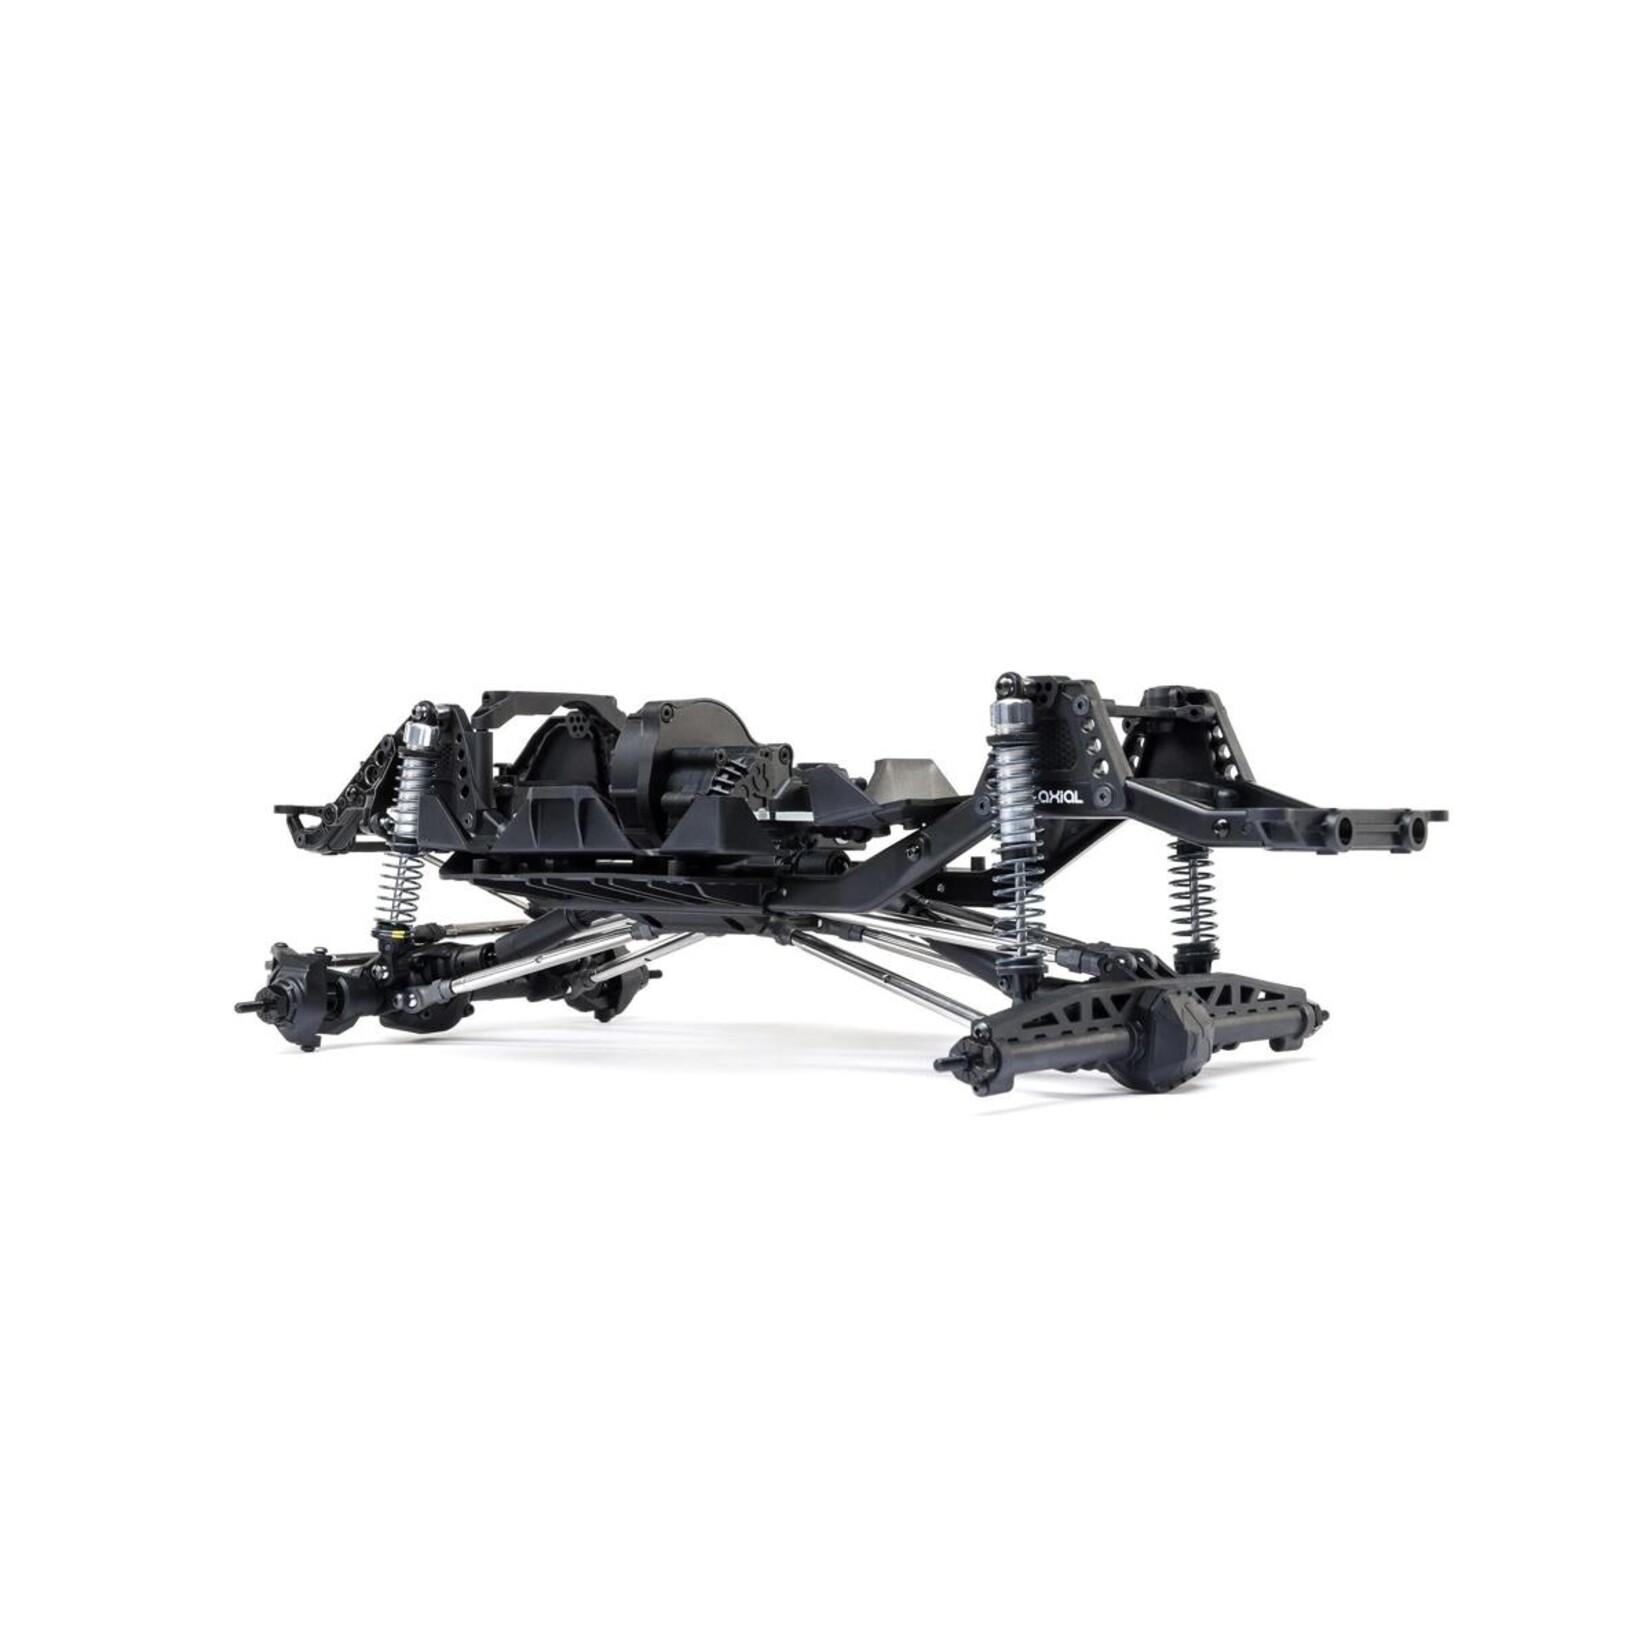 Axial Axial SCX10 III Base Camp 1/10 4WD Scale Rock Crawler Builder's Kit #AXI03011